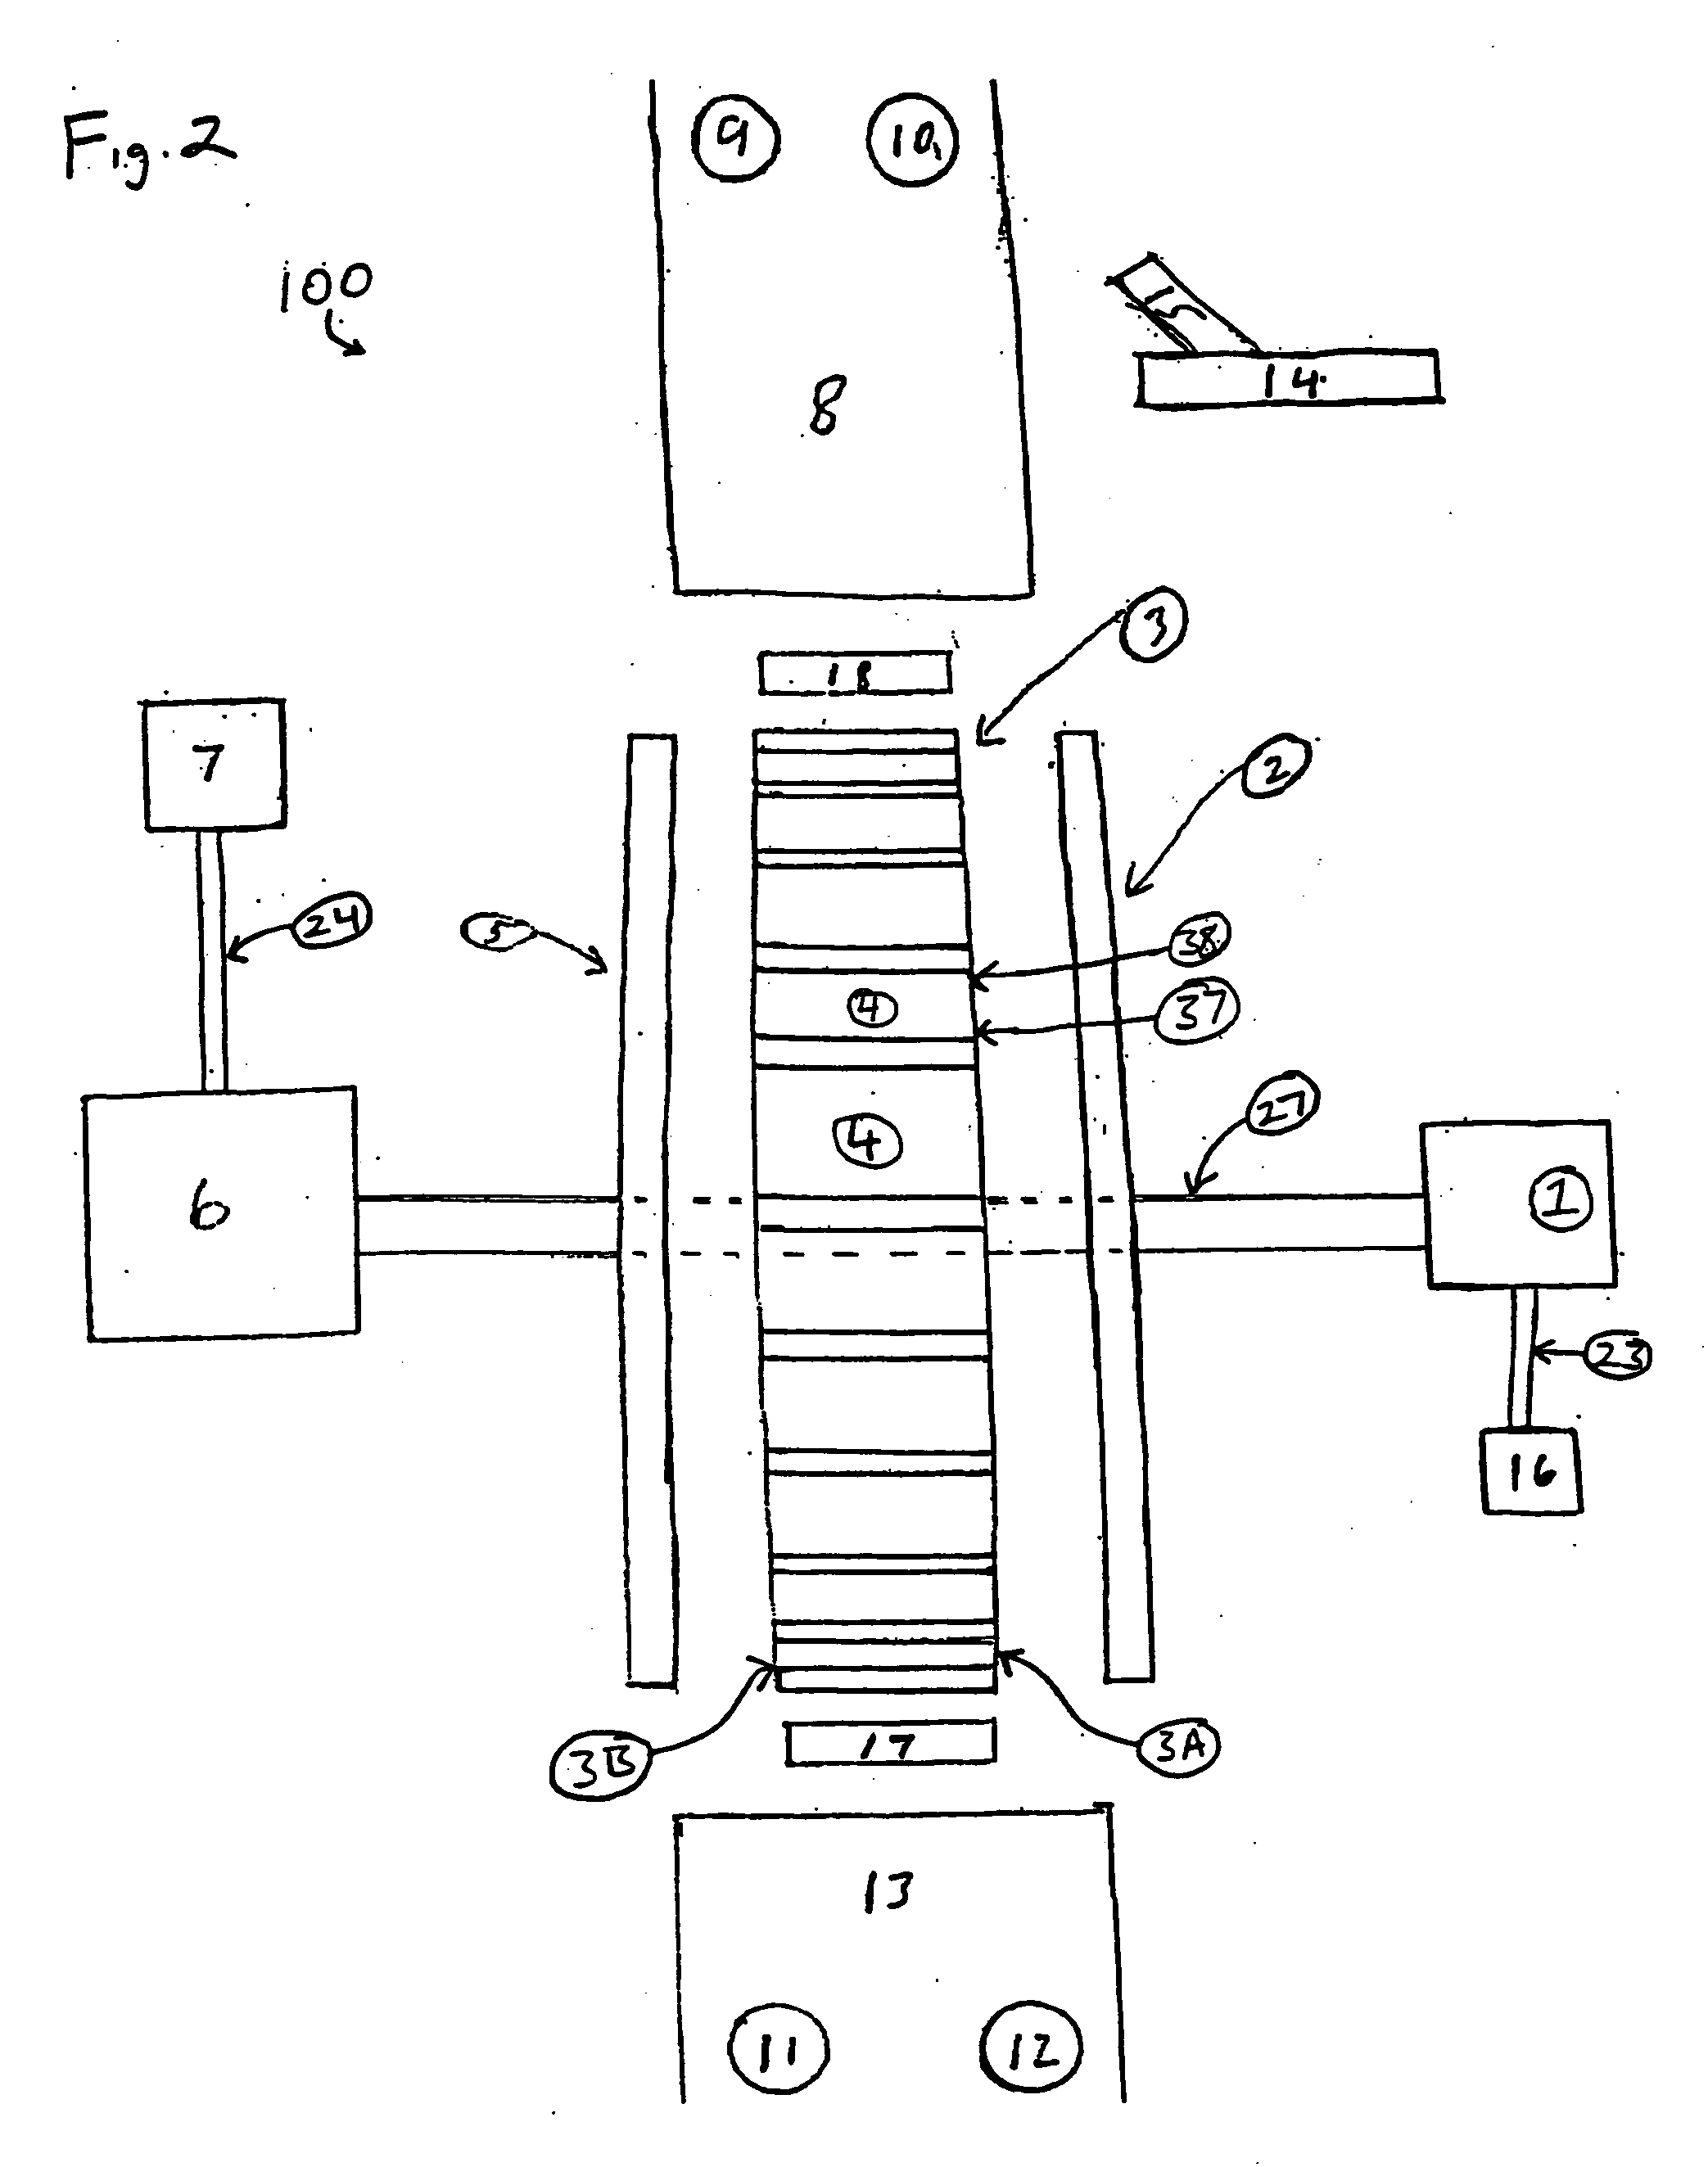 Method and system for power generation